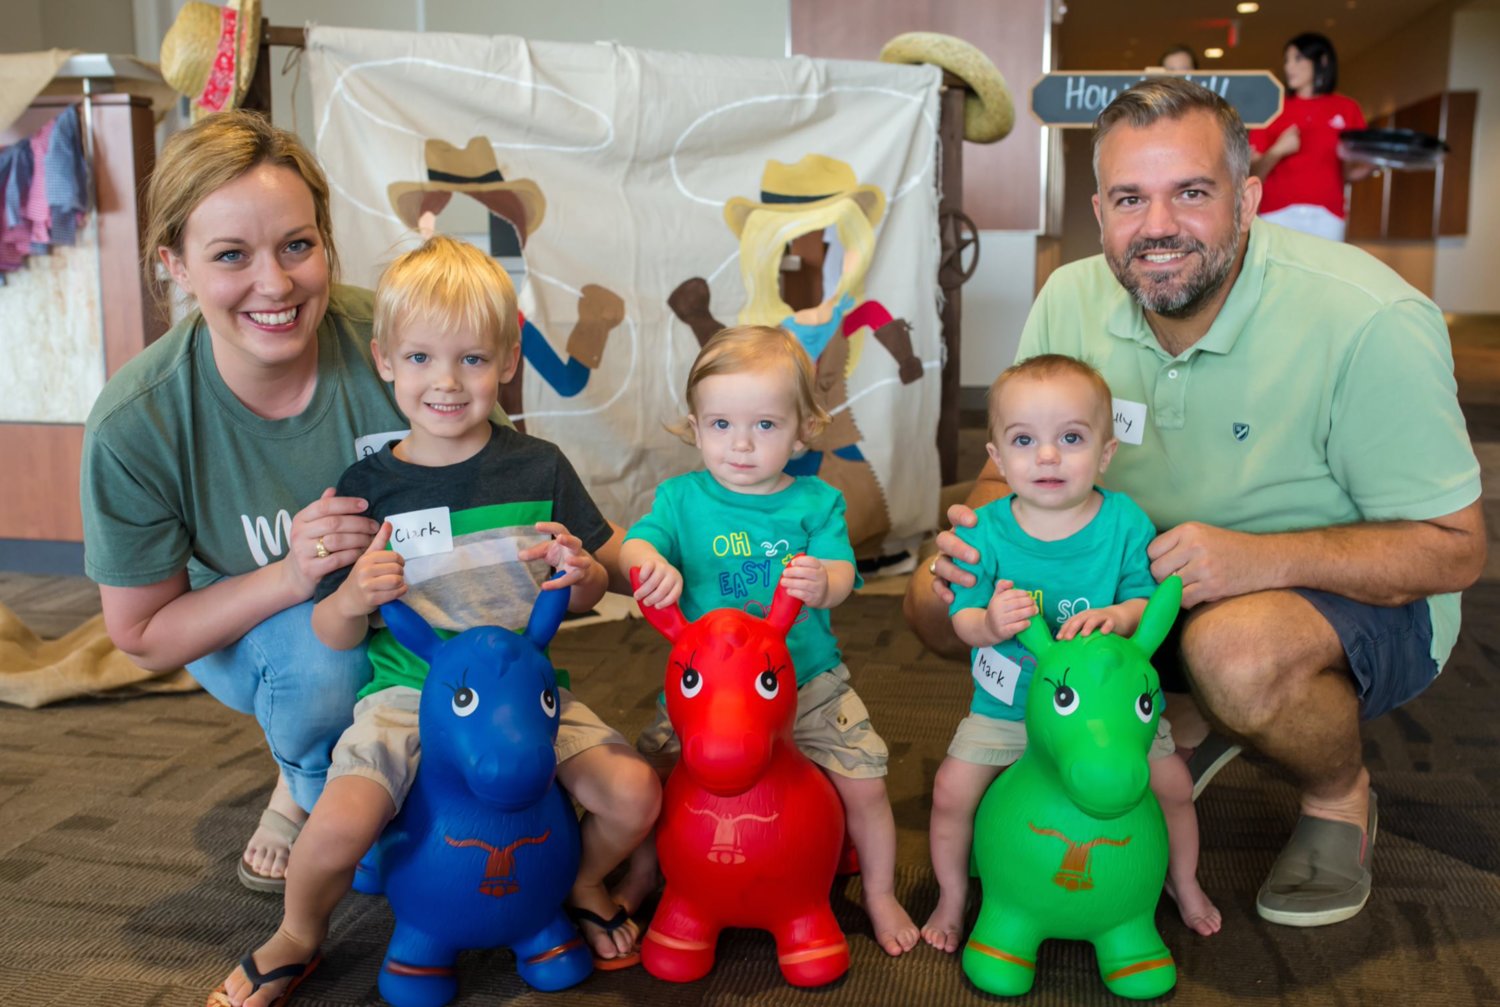 From left, Anne, Clark, George, Mark and Kelly Billips celebrate their twins’ graduation from the NICU in 2018.